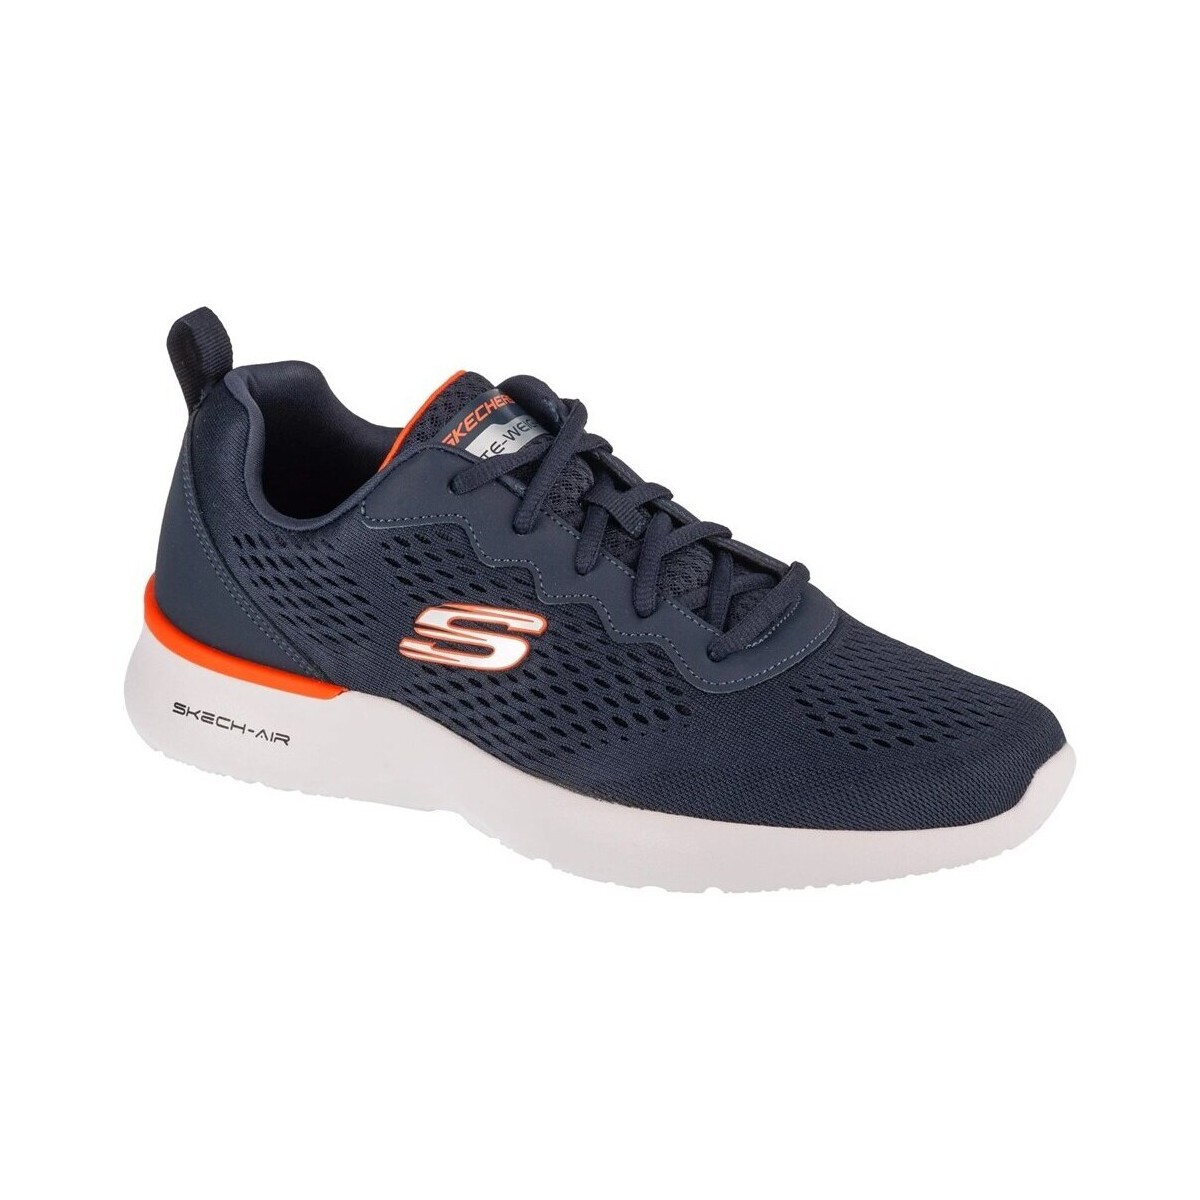 Skechers Skech-air Dynamight Tuned Up Marine